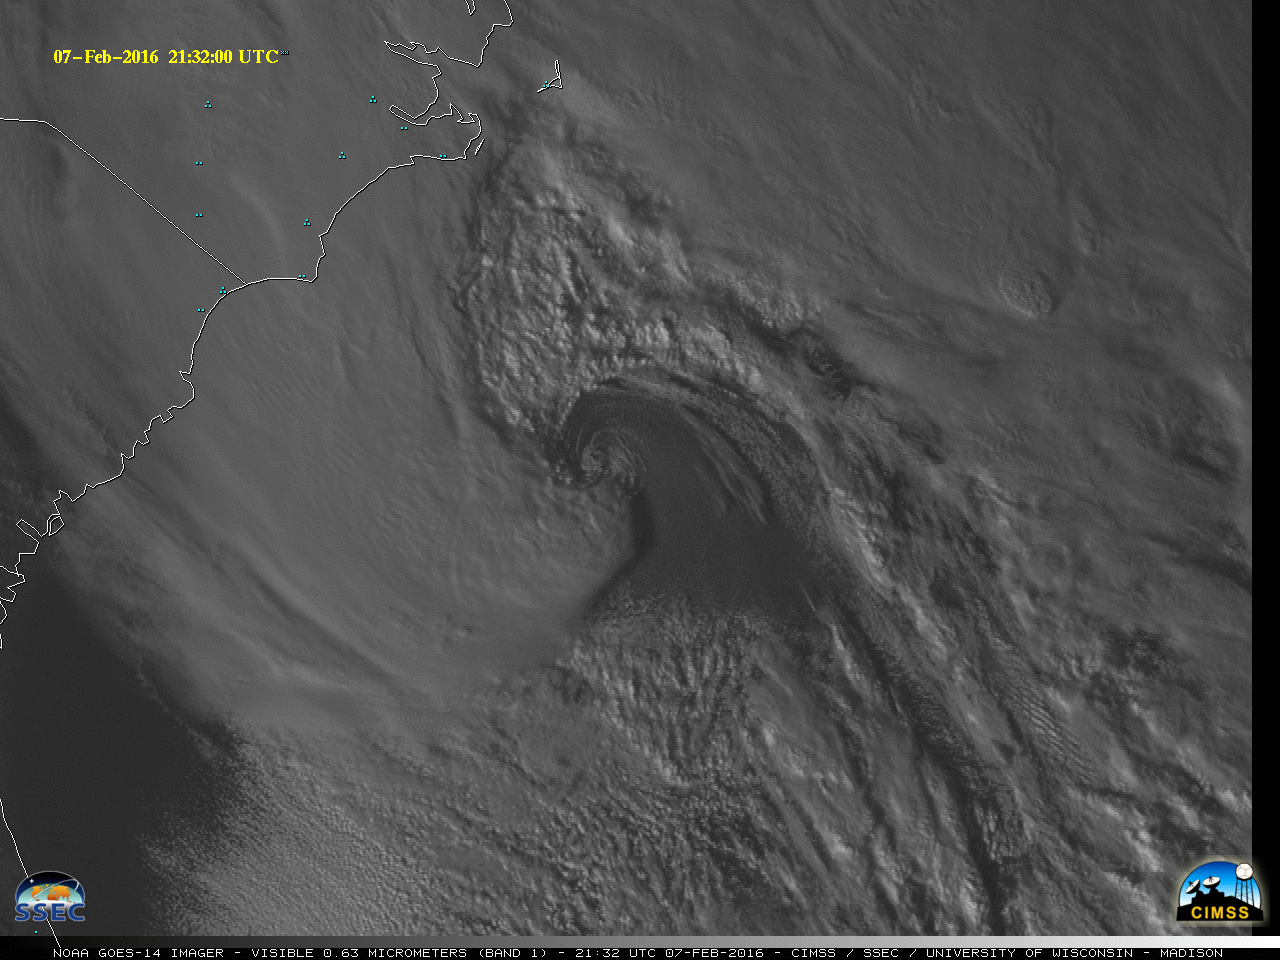 GOES-14 Visible (0.63 µm) images, with surface weather symbols plotted [click to play MP4 animation]